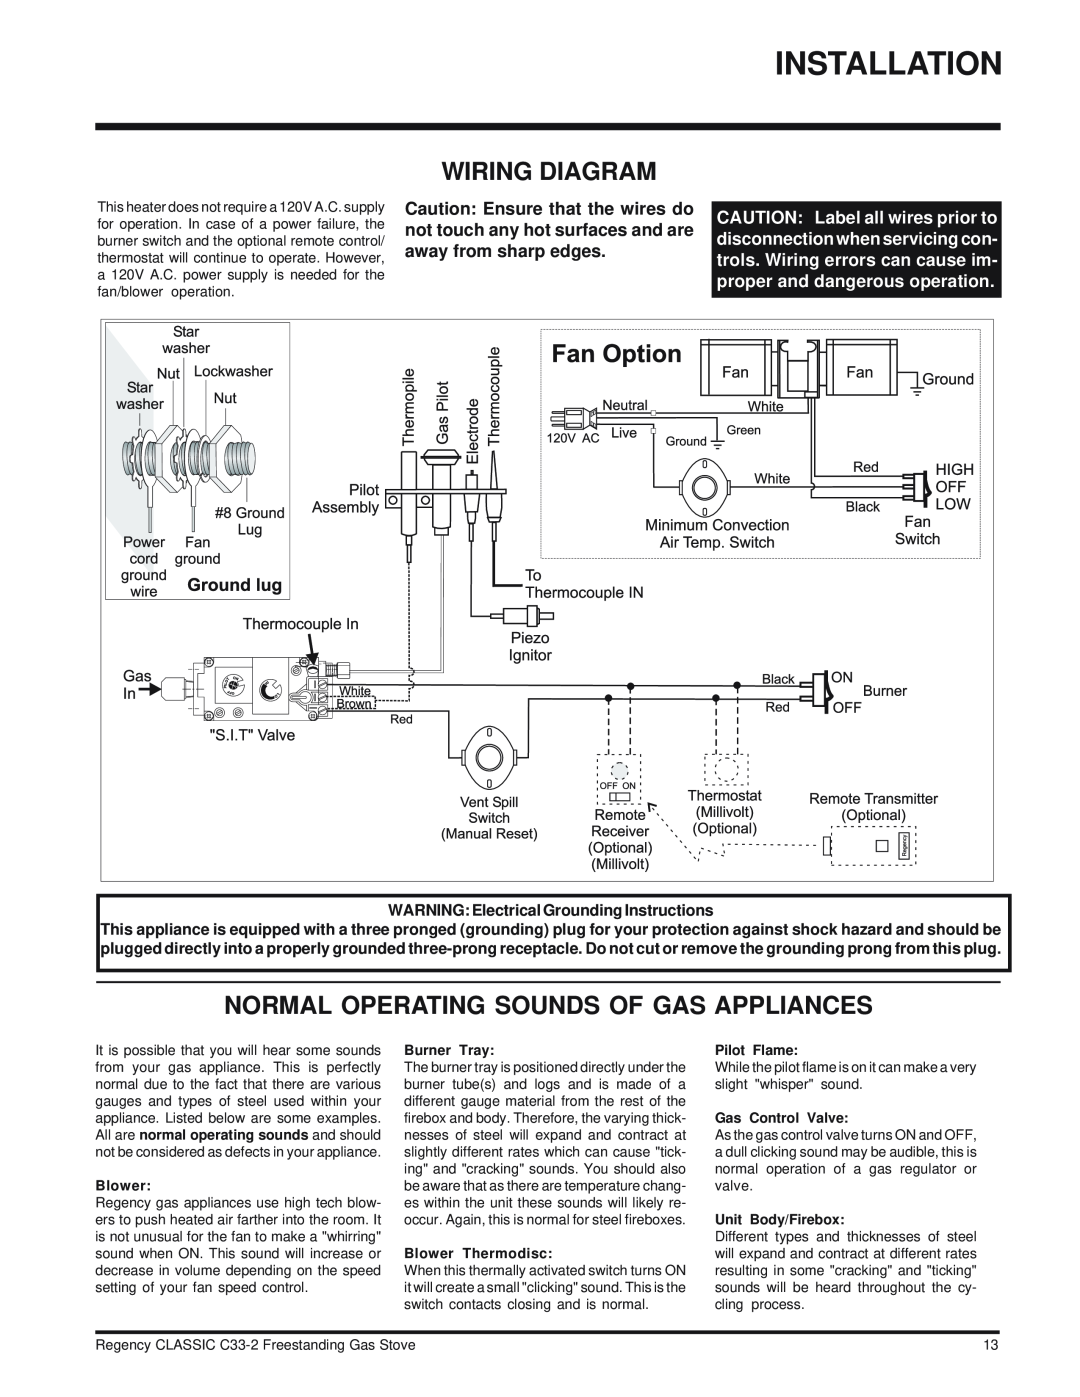 Regency C33-NG2 Wiring Diagram, Normal Operating Sounds Of Gas Appliances, WARNING Electrical Grounding Instructions 